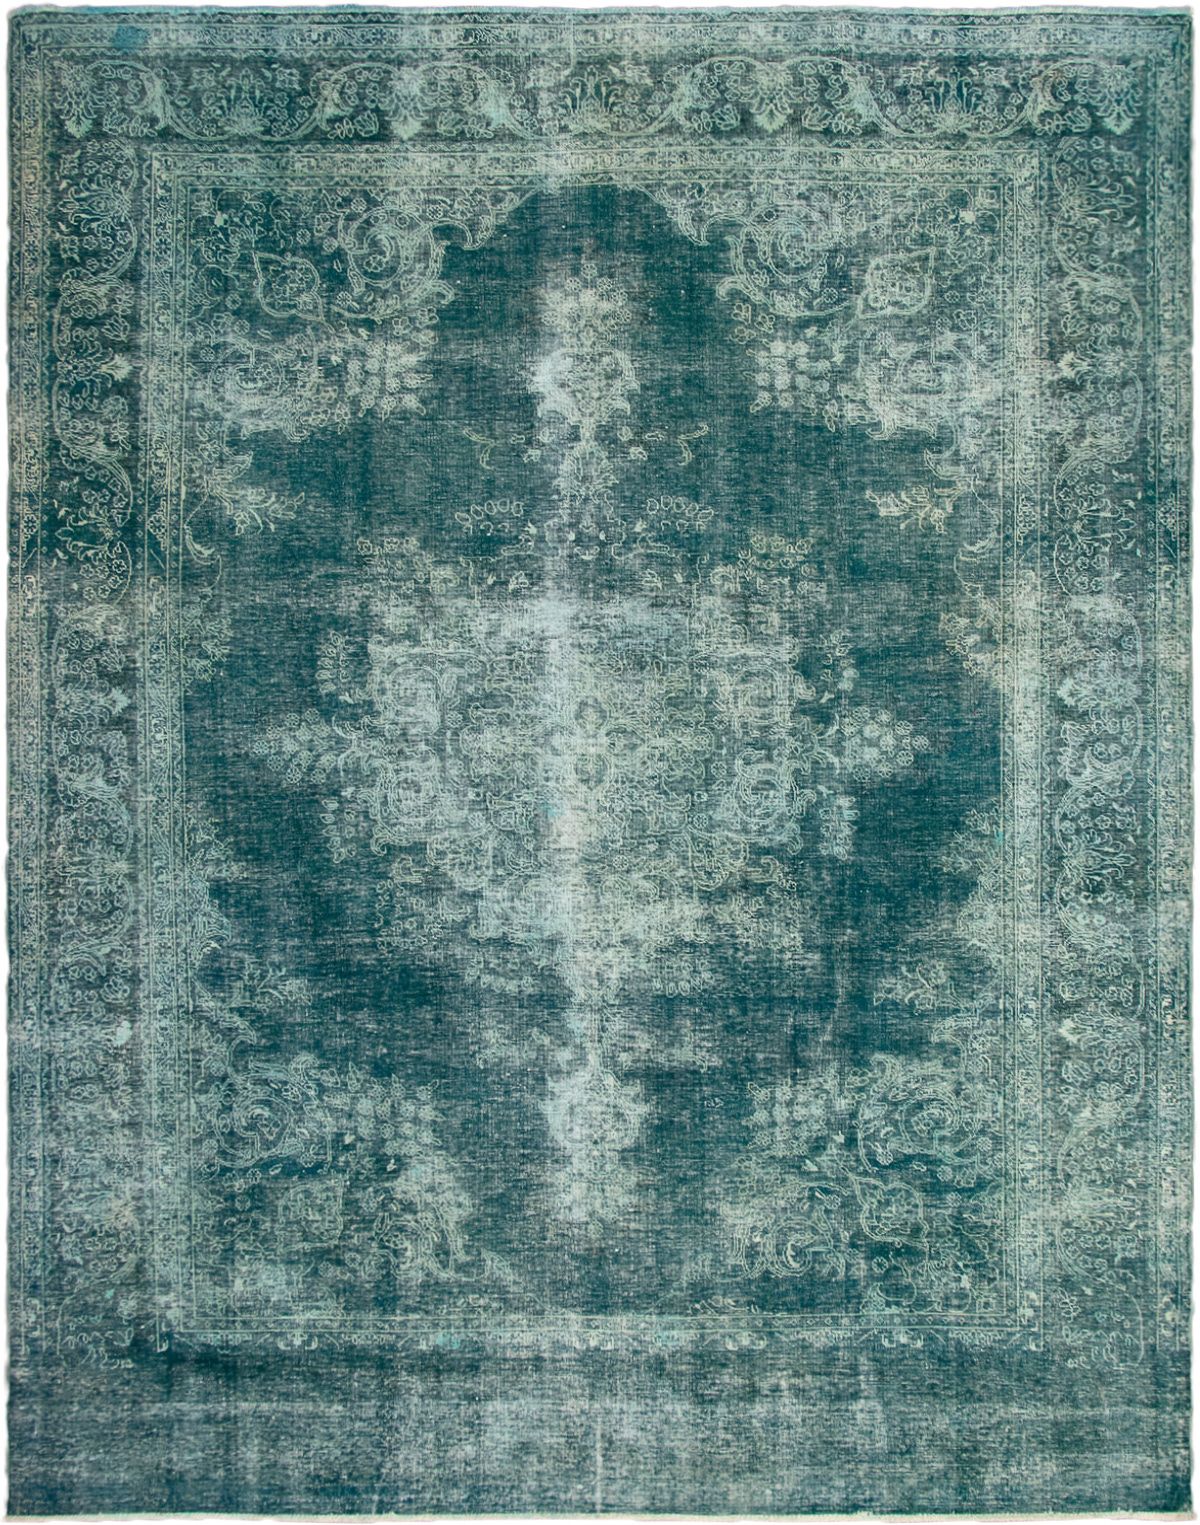 Hand-knotted Color Transition Teal Wool Rug 9'10" x 12'4" Size: 9'10" x 12'4"  